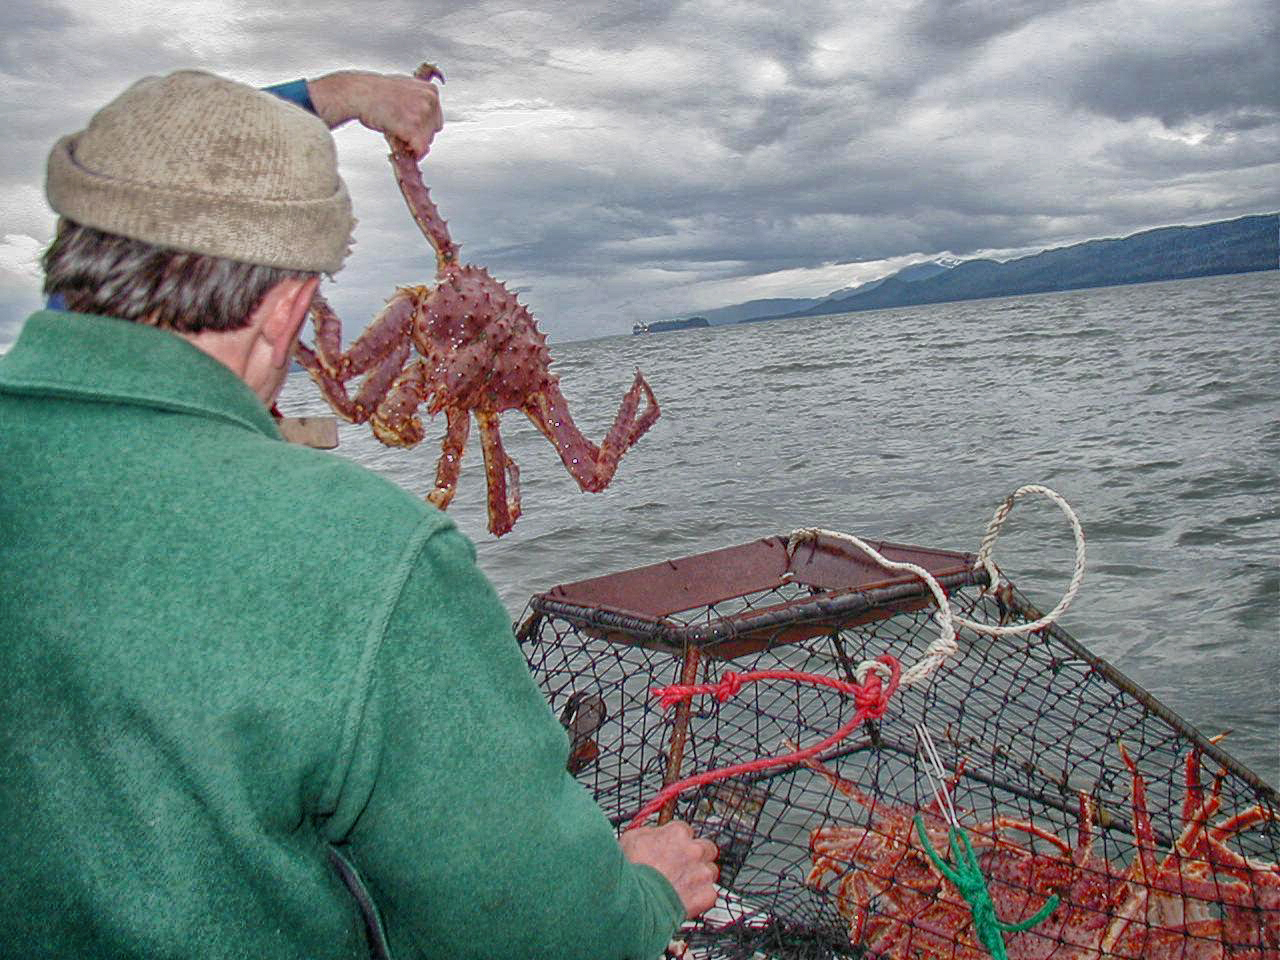 File:Catch of King Crab.jpg - Wikimedia Commons